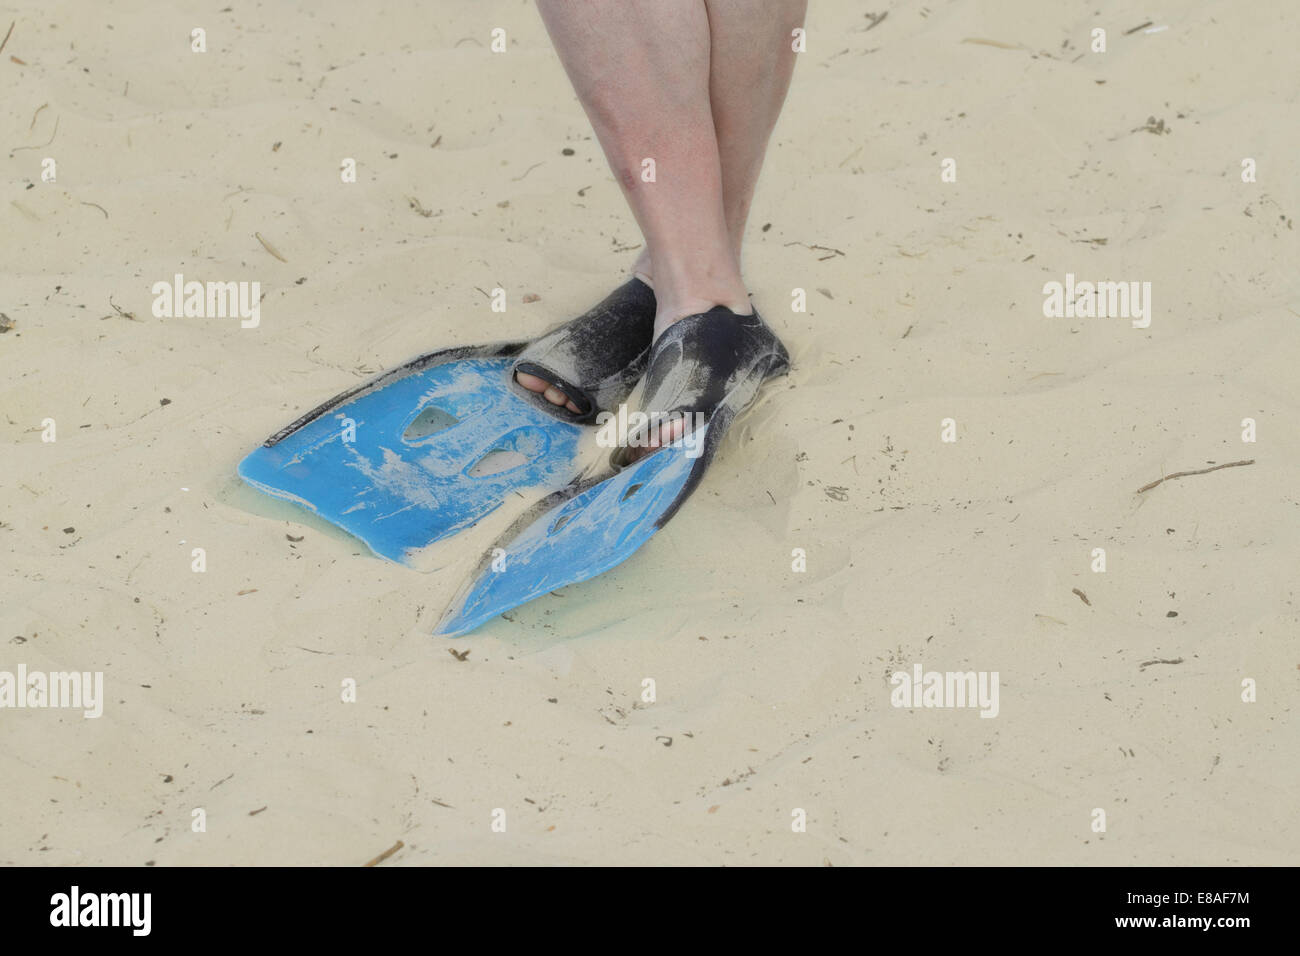 Crossed legs in flippers on sand closeup Stock Photo